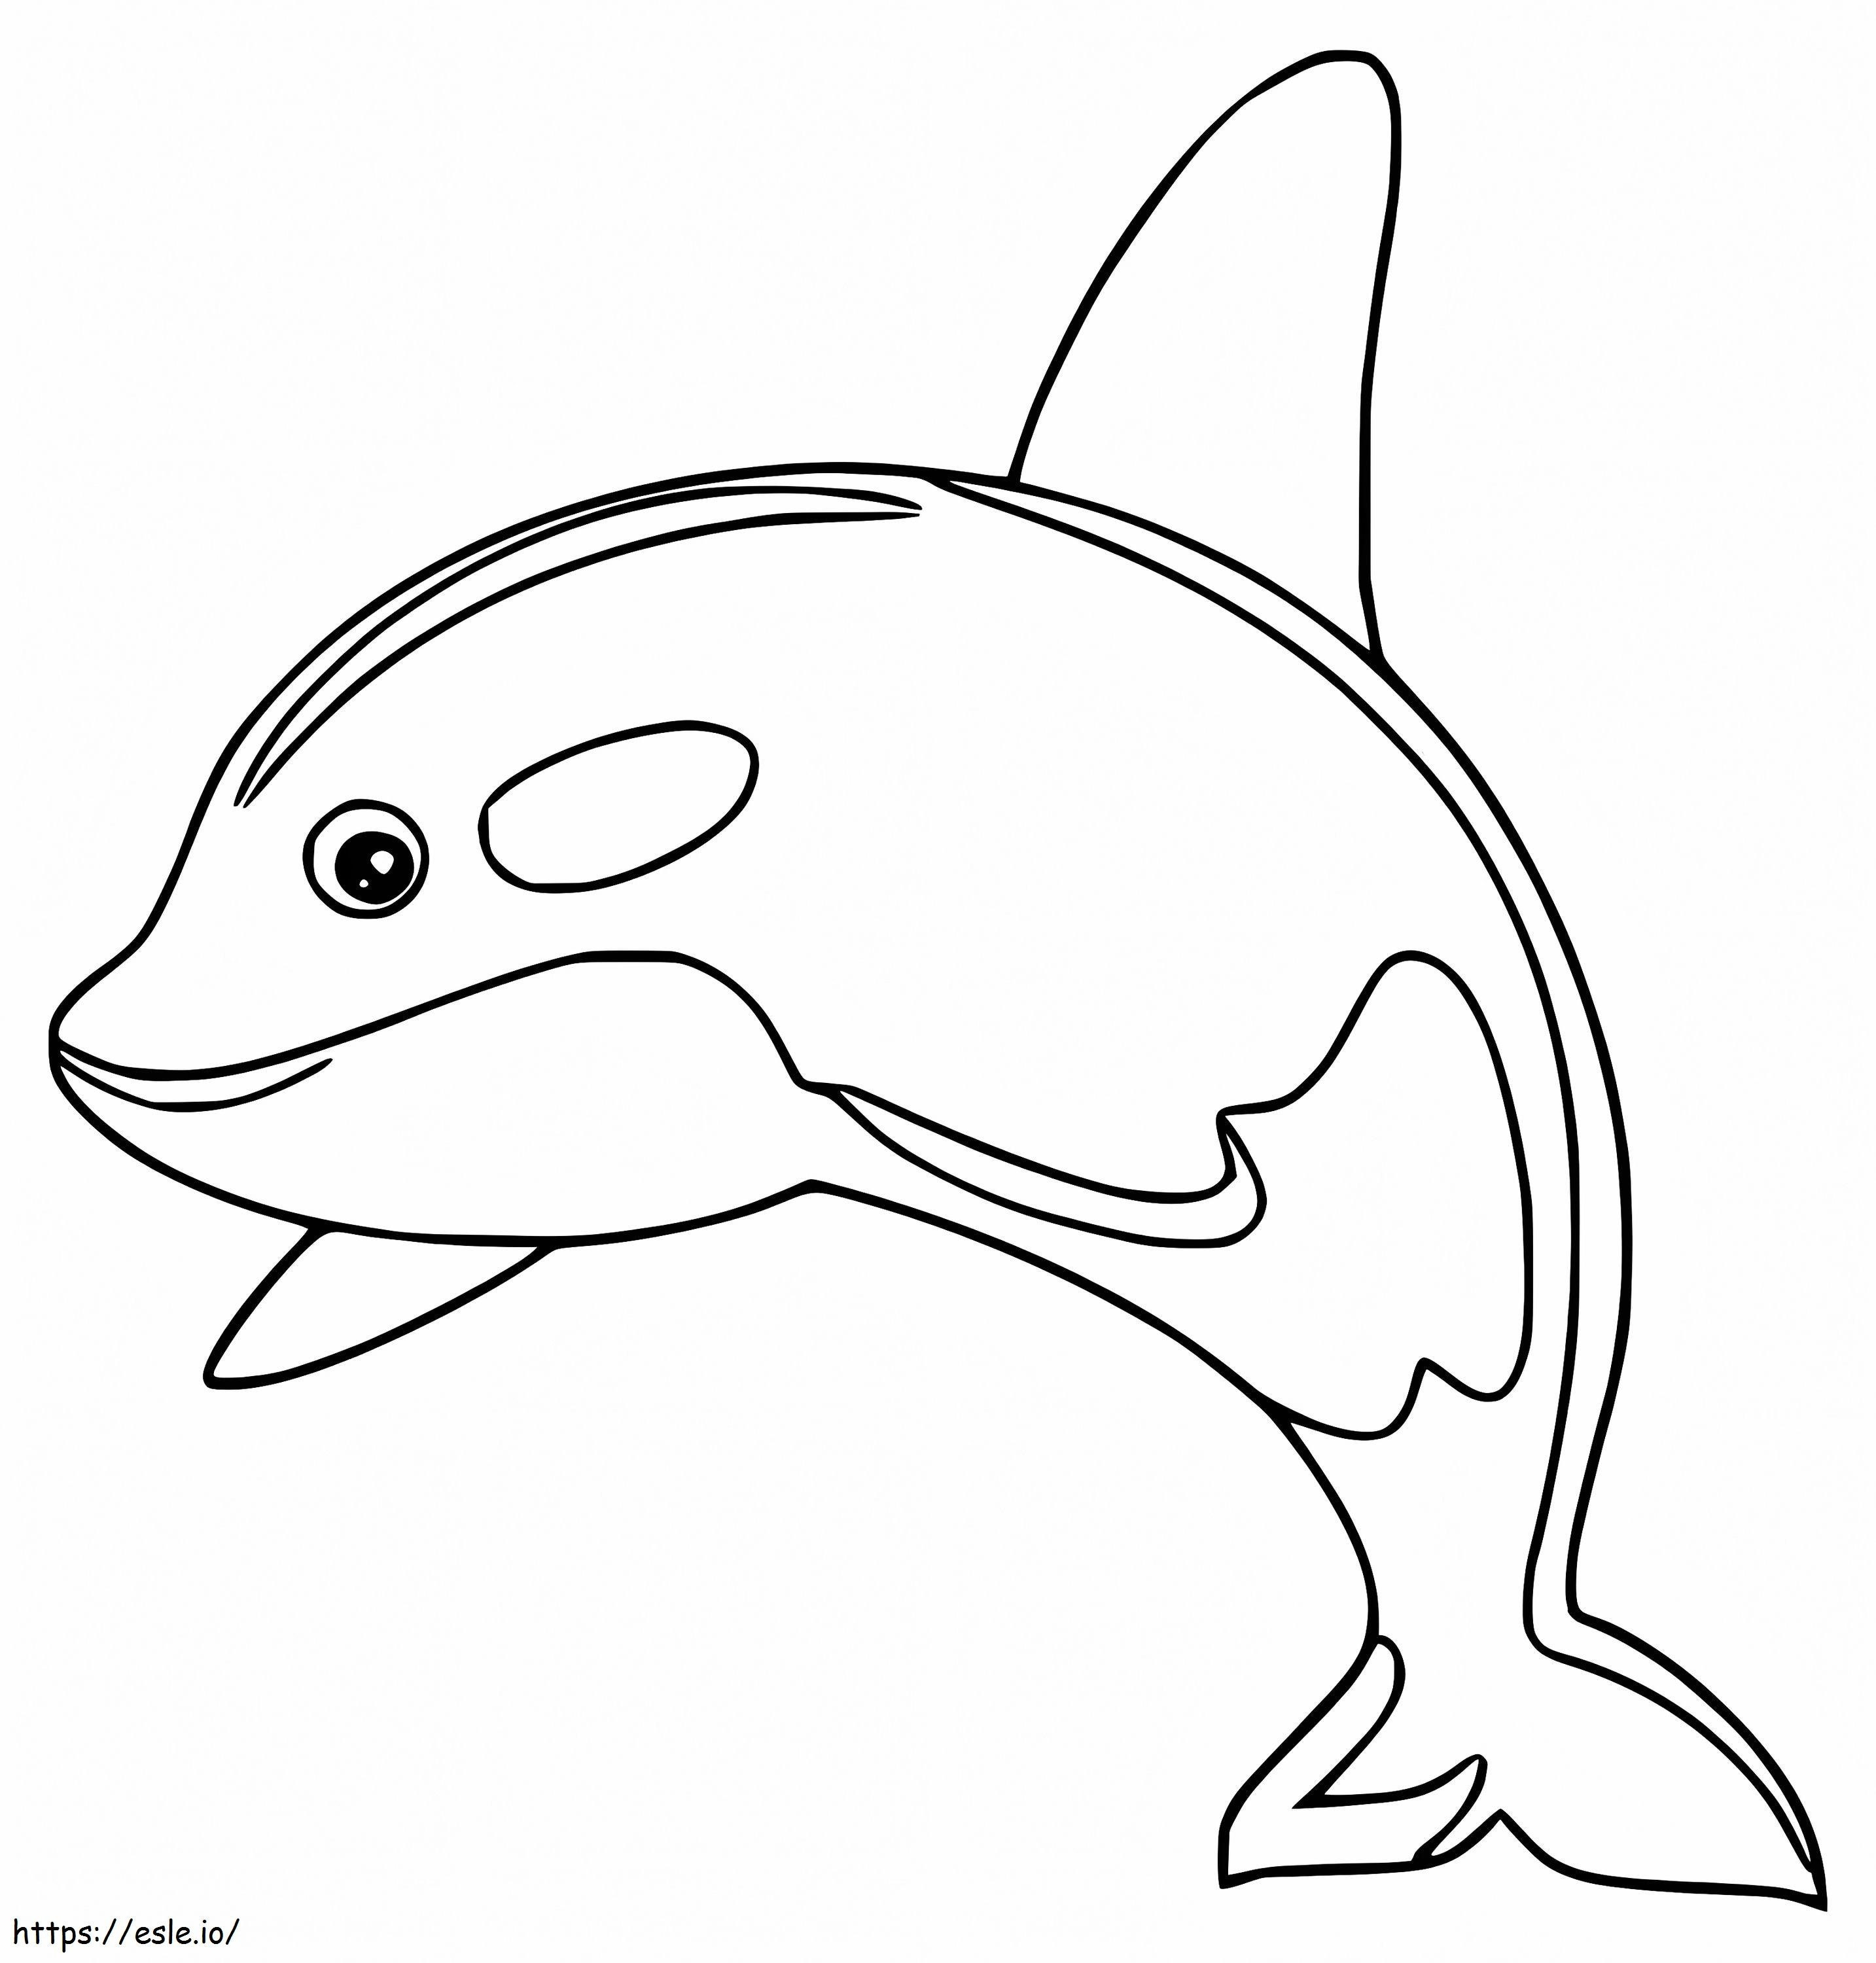 A Killer Whale coloring page